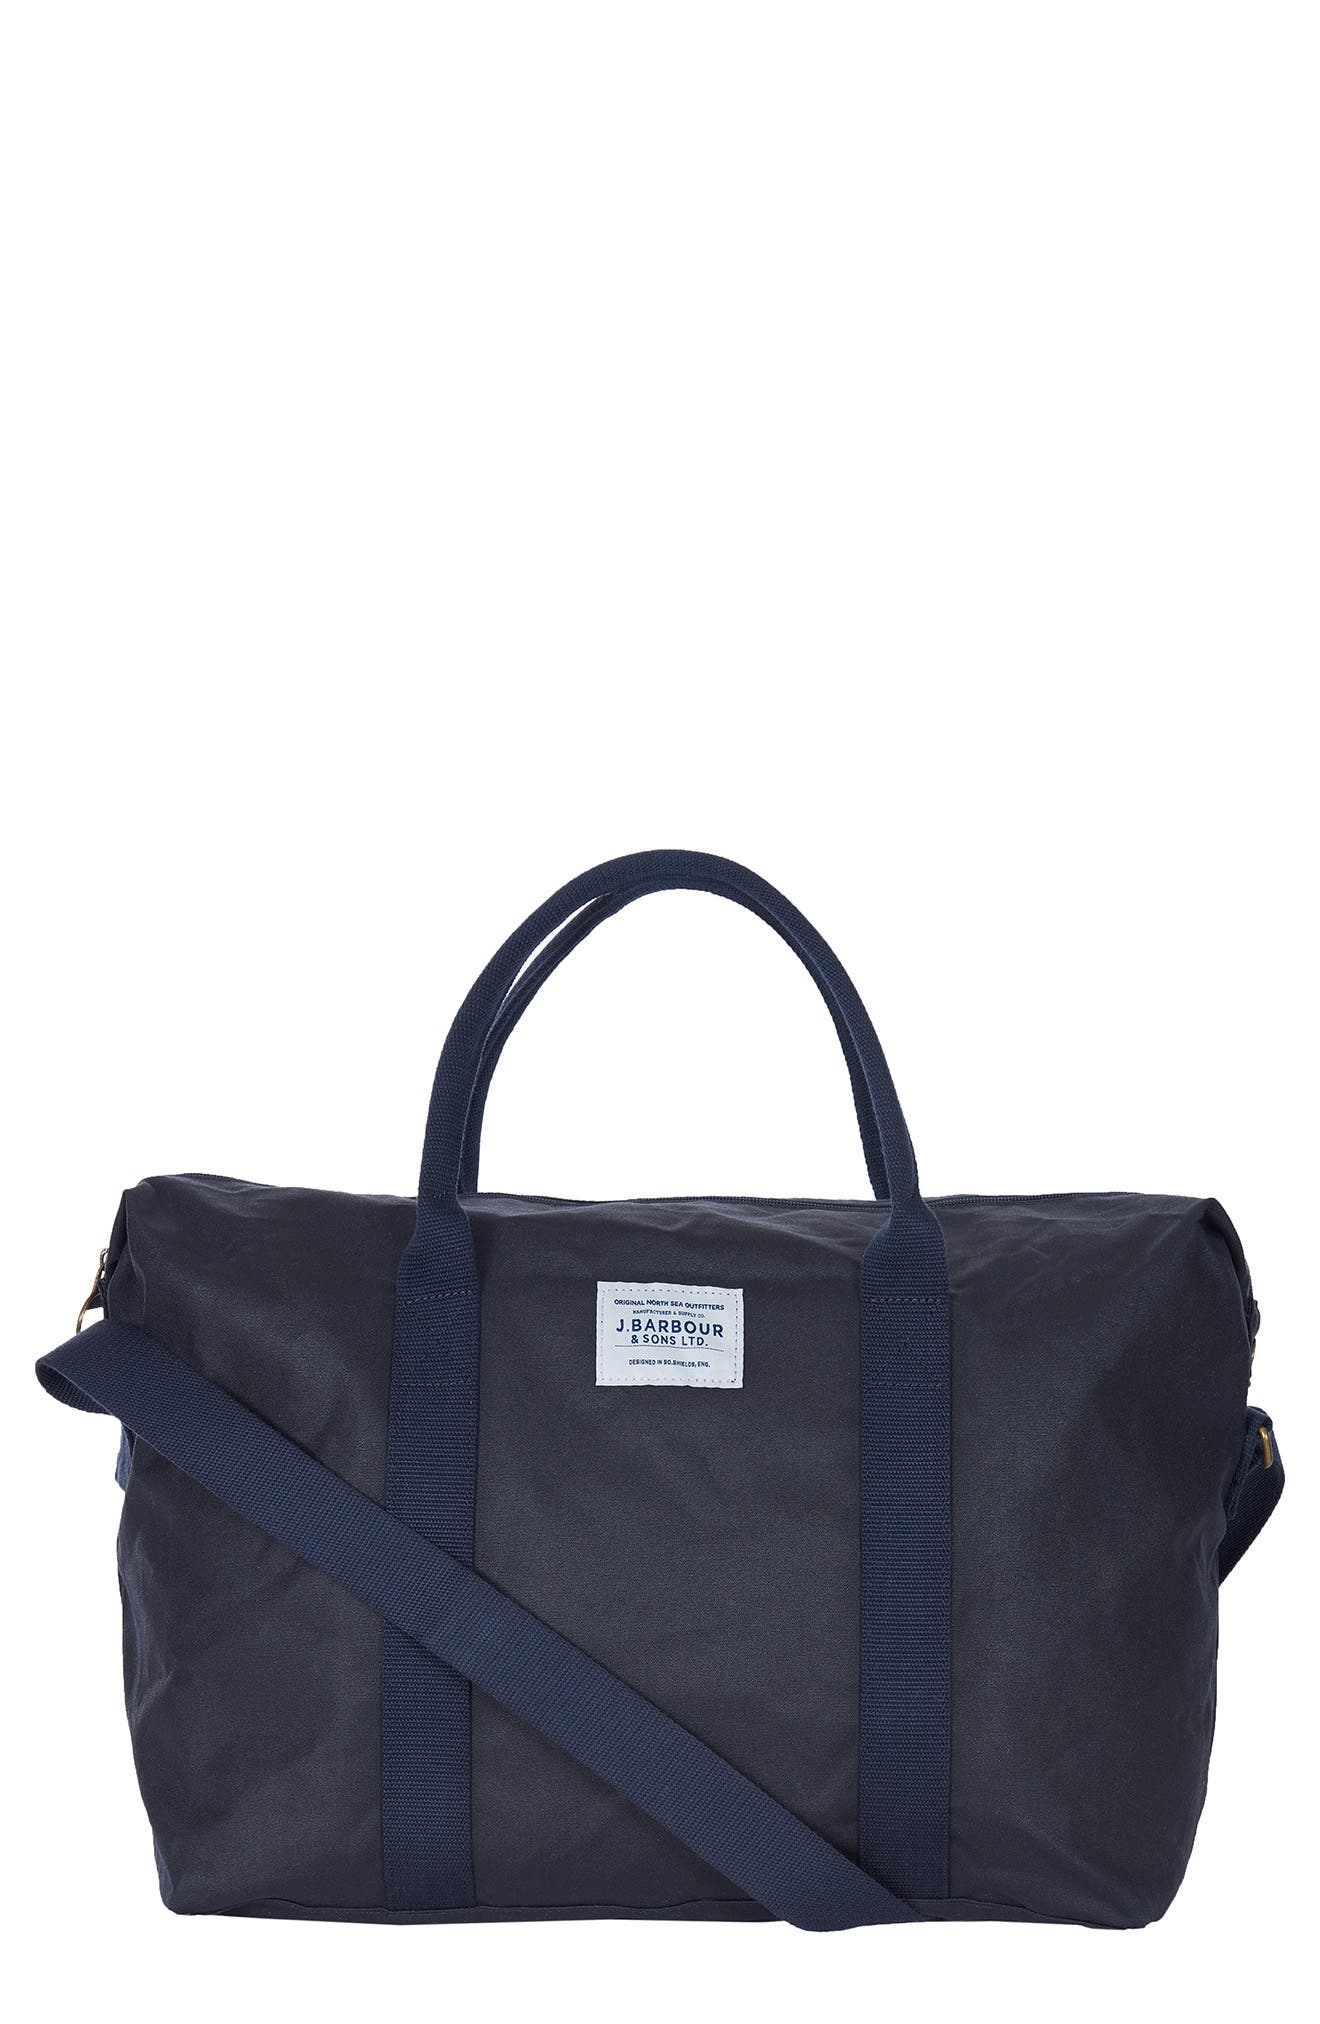 barbour overnight bags mens